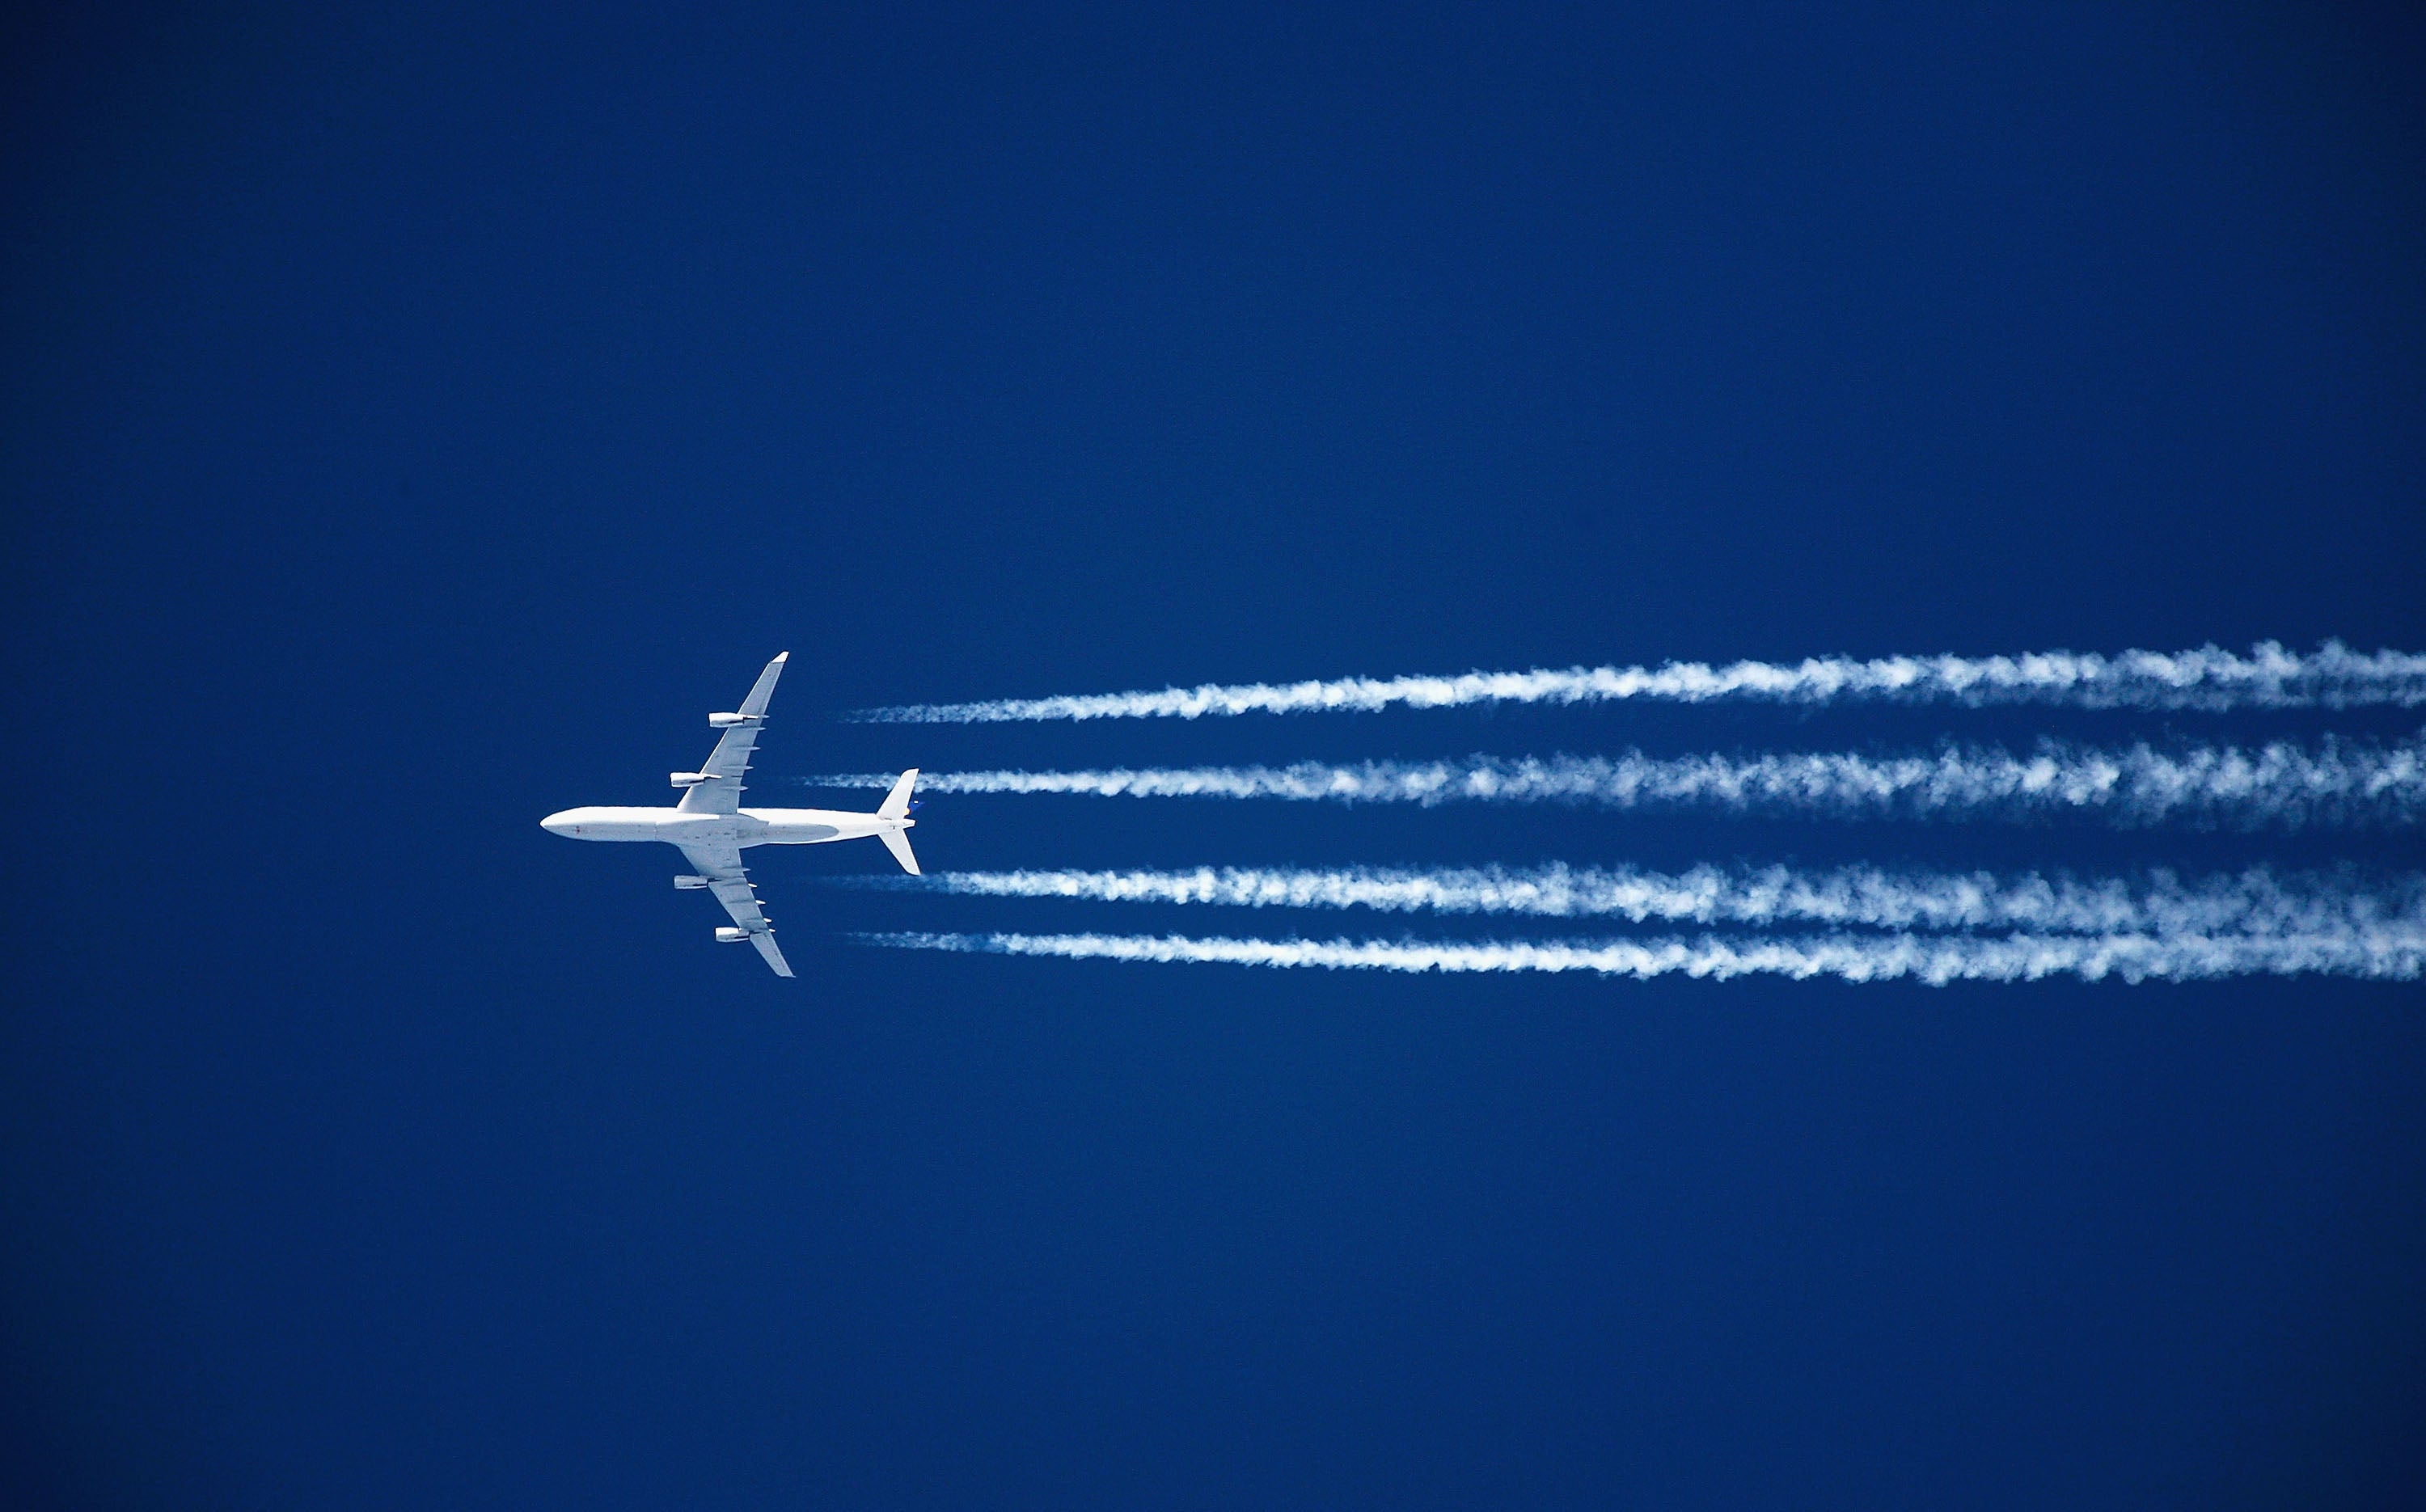 Those eye-catching contrails are actually more damaging to the environment than a plane’s carbon emissions